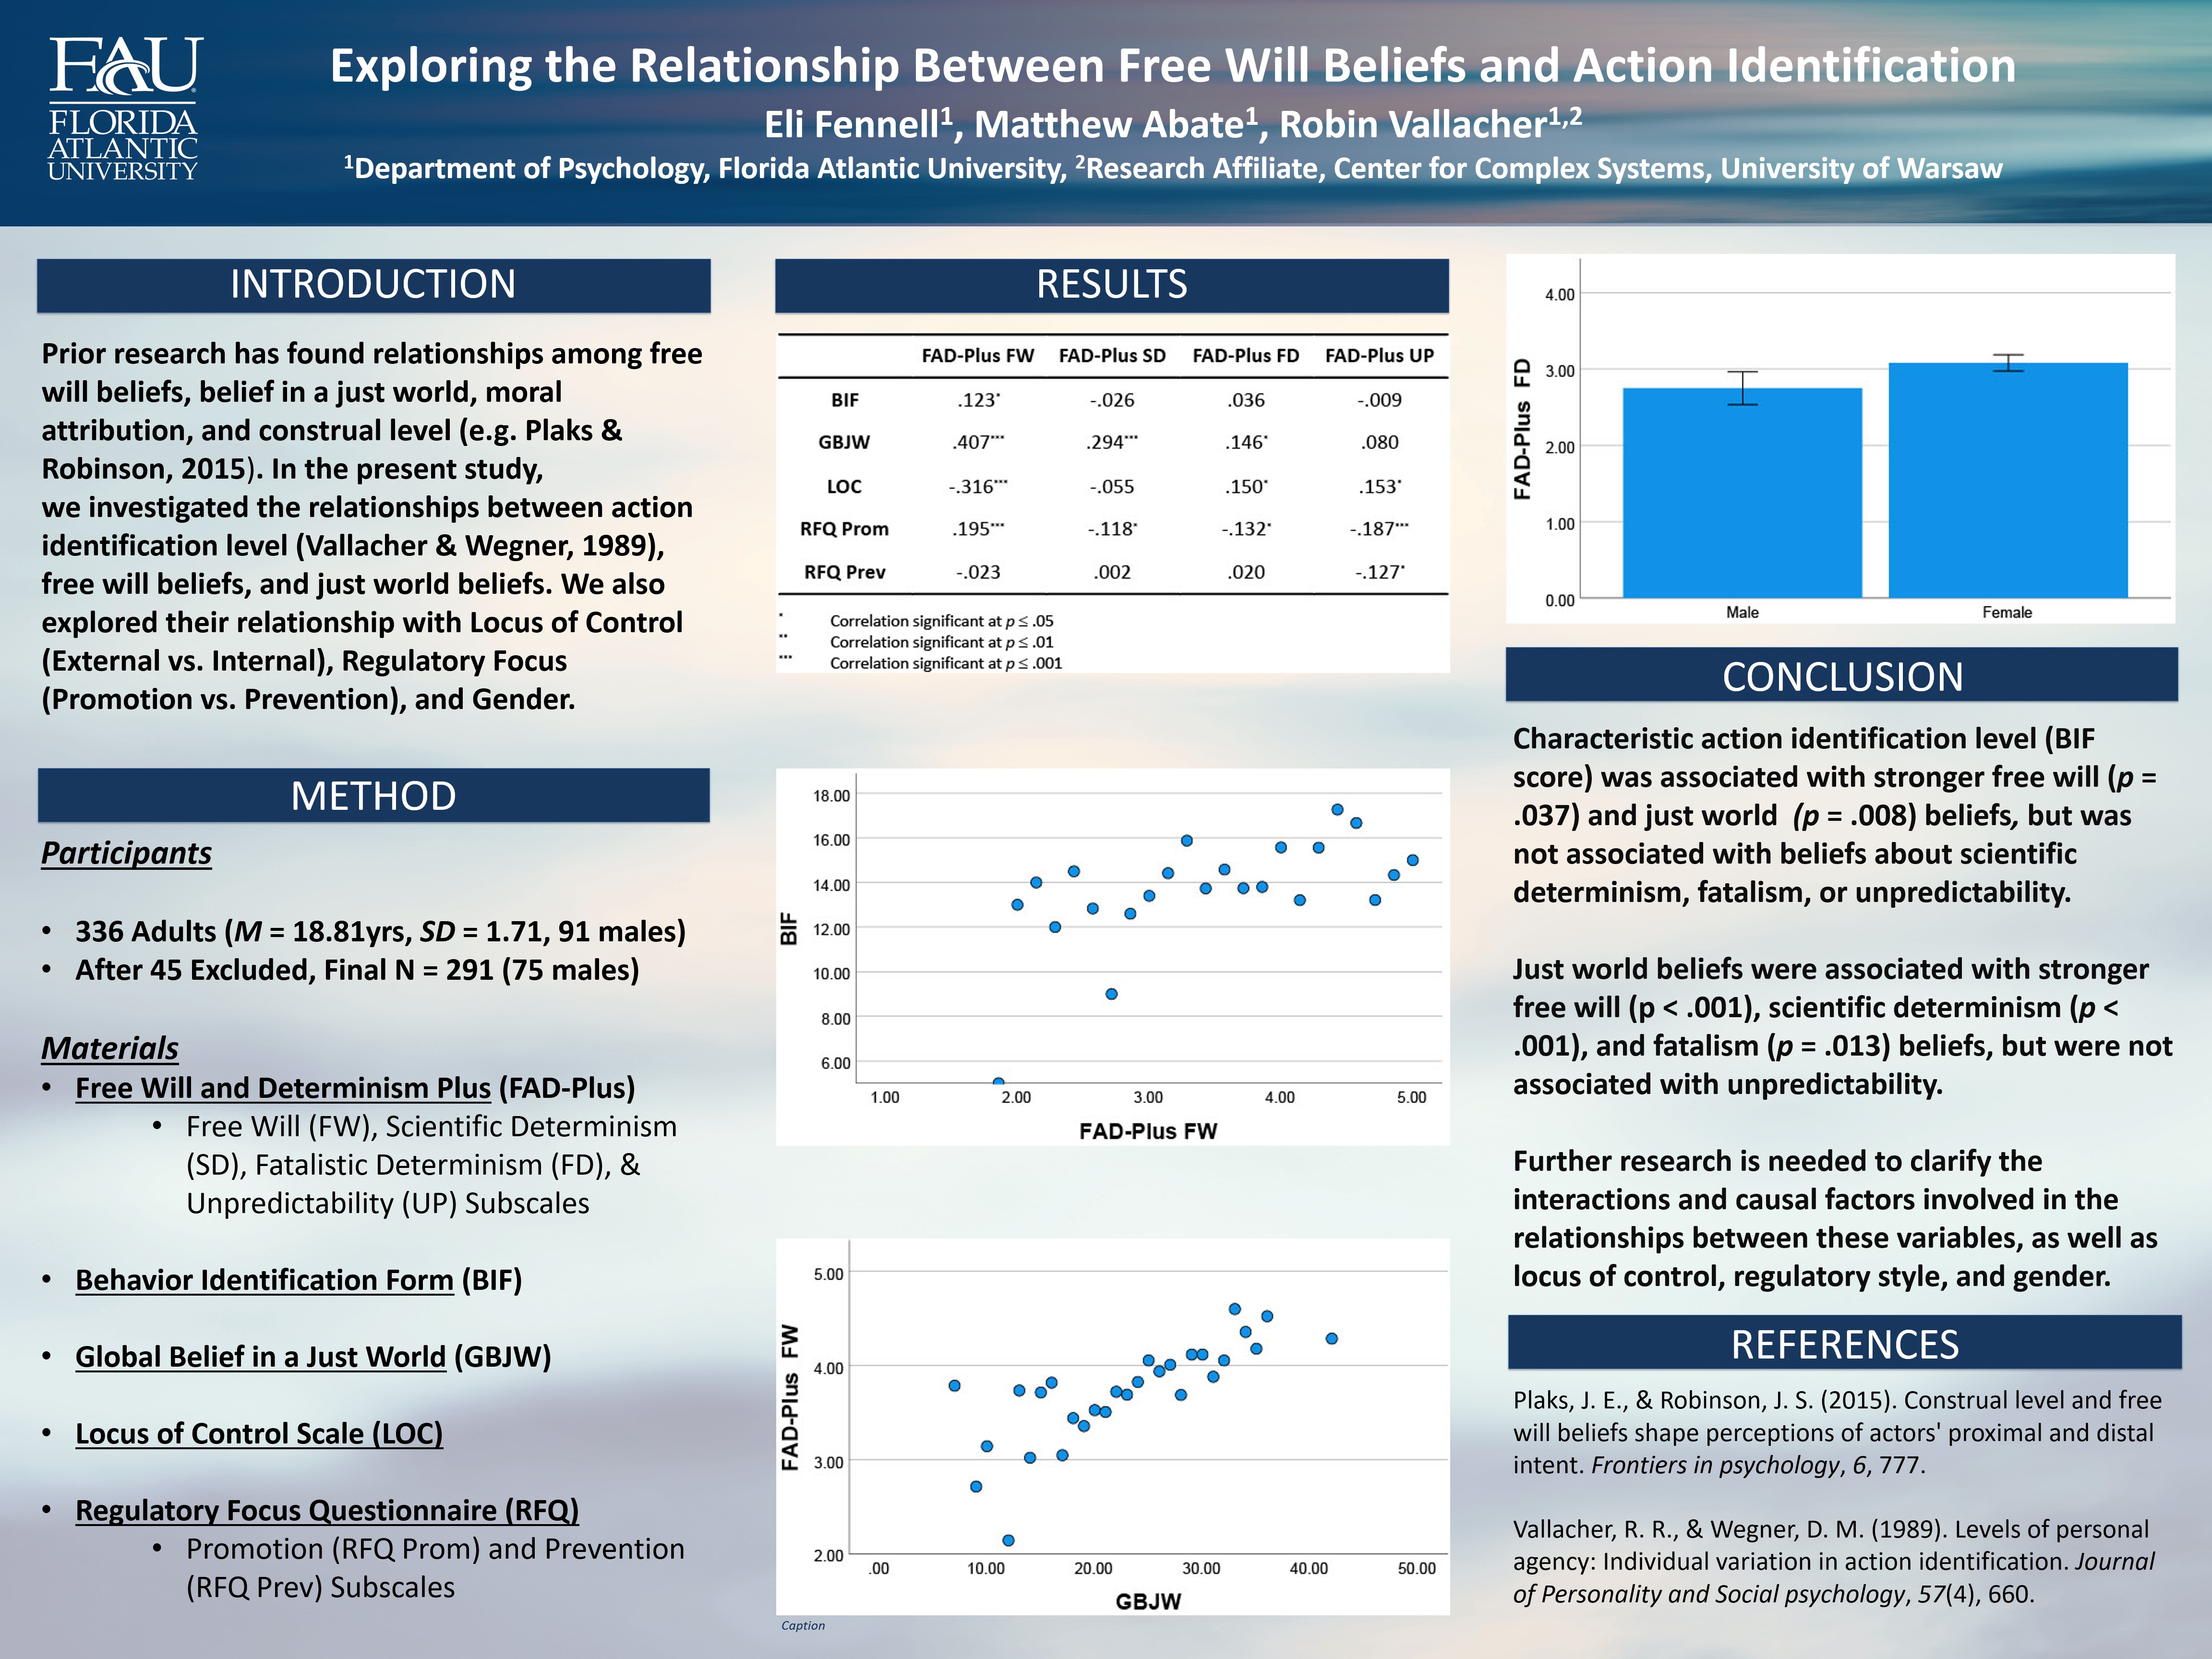 Exploring the Relationship Between Free Will Beliefs and Action Identification. Society for Personality and Social Psychology 2021 Annual Convention. Eli Fennell, Matthew Abate, & Robin R. Vallacher